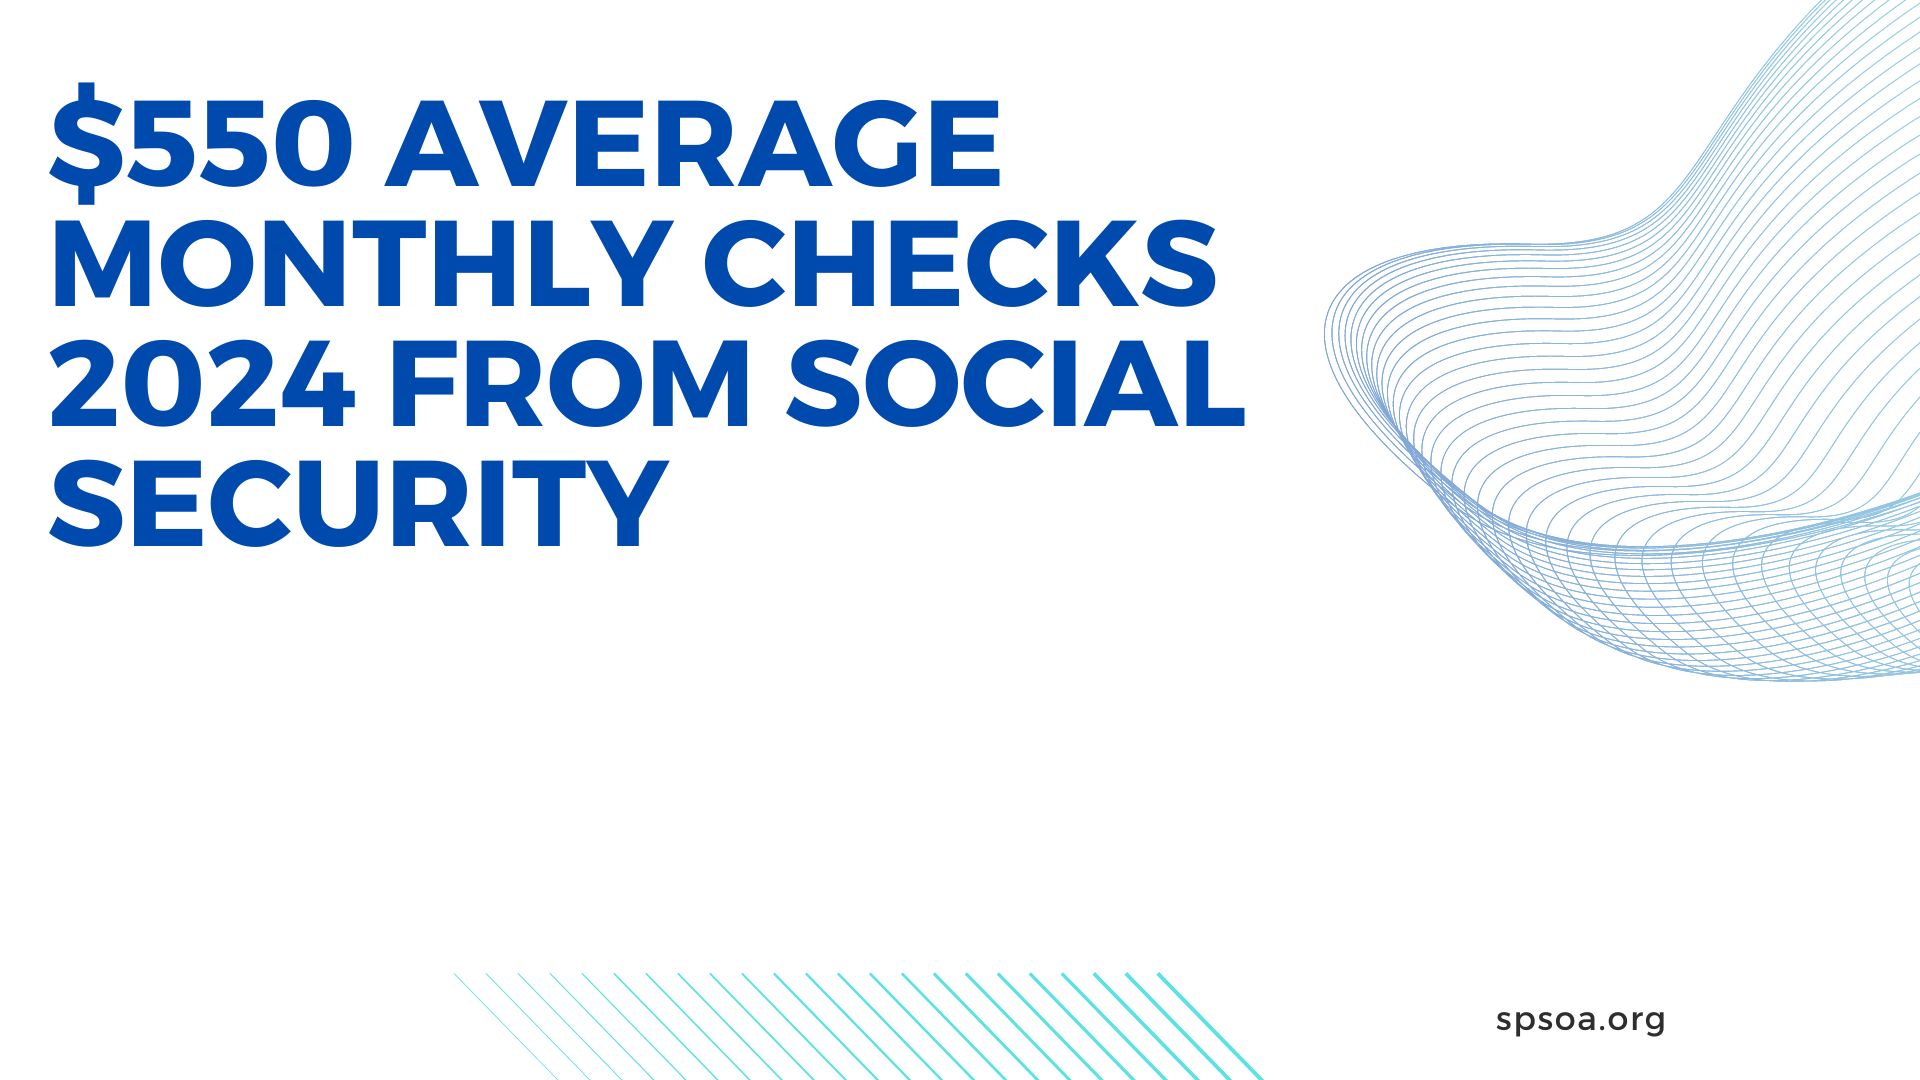 $550 Average Monthly Checks 2024 from Social Security